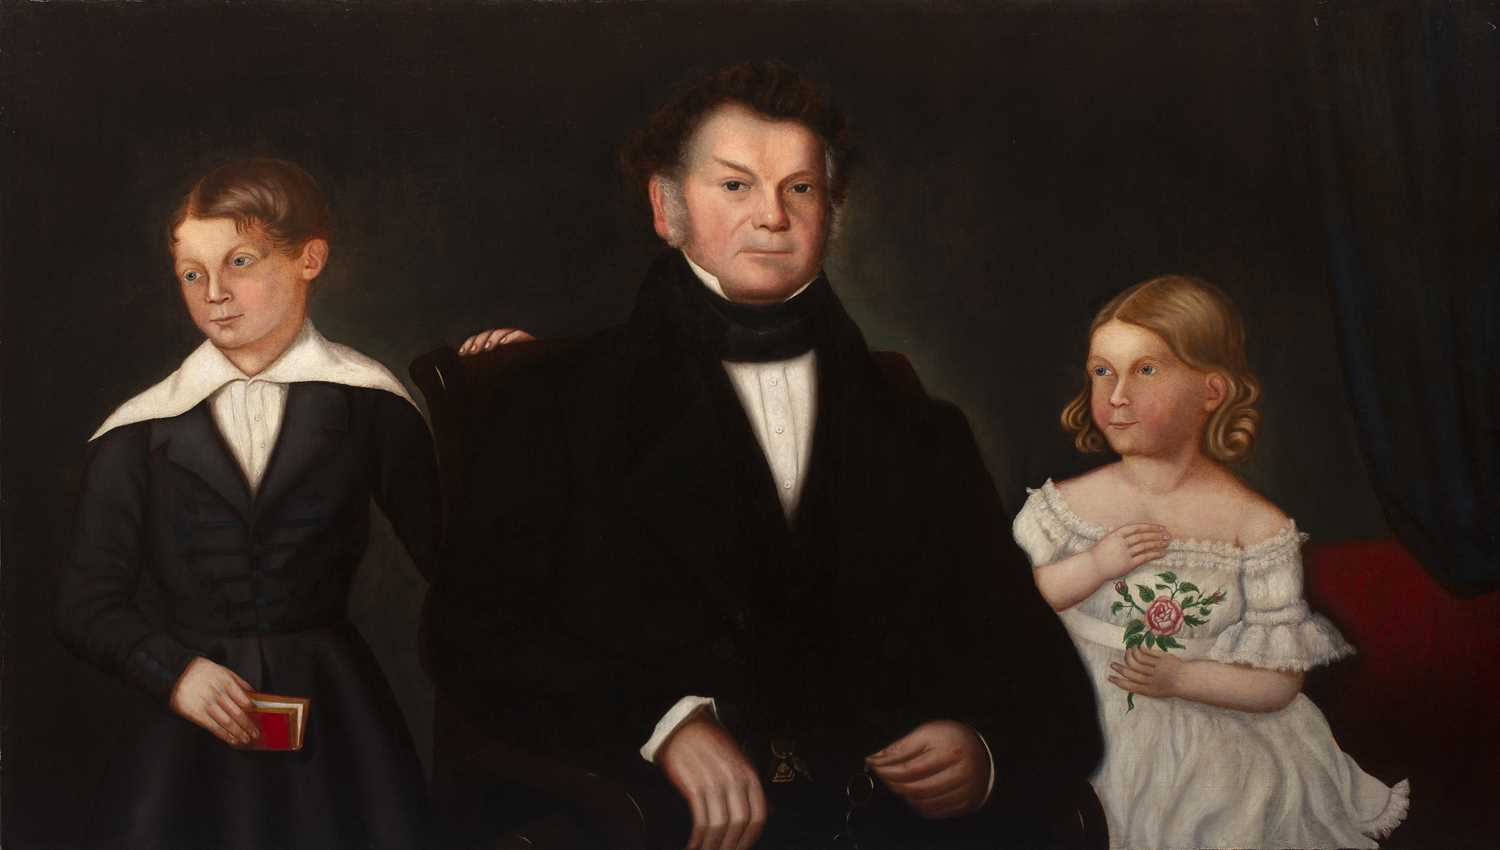 Lot 56 - R * H * Stancliffe (19th century), Portrait of a father